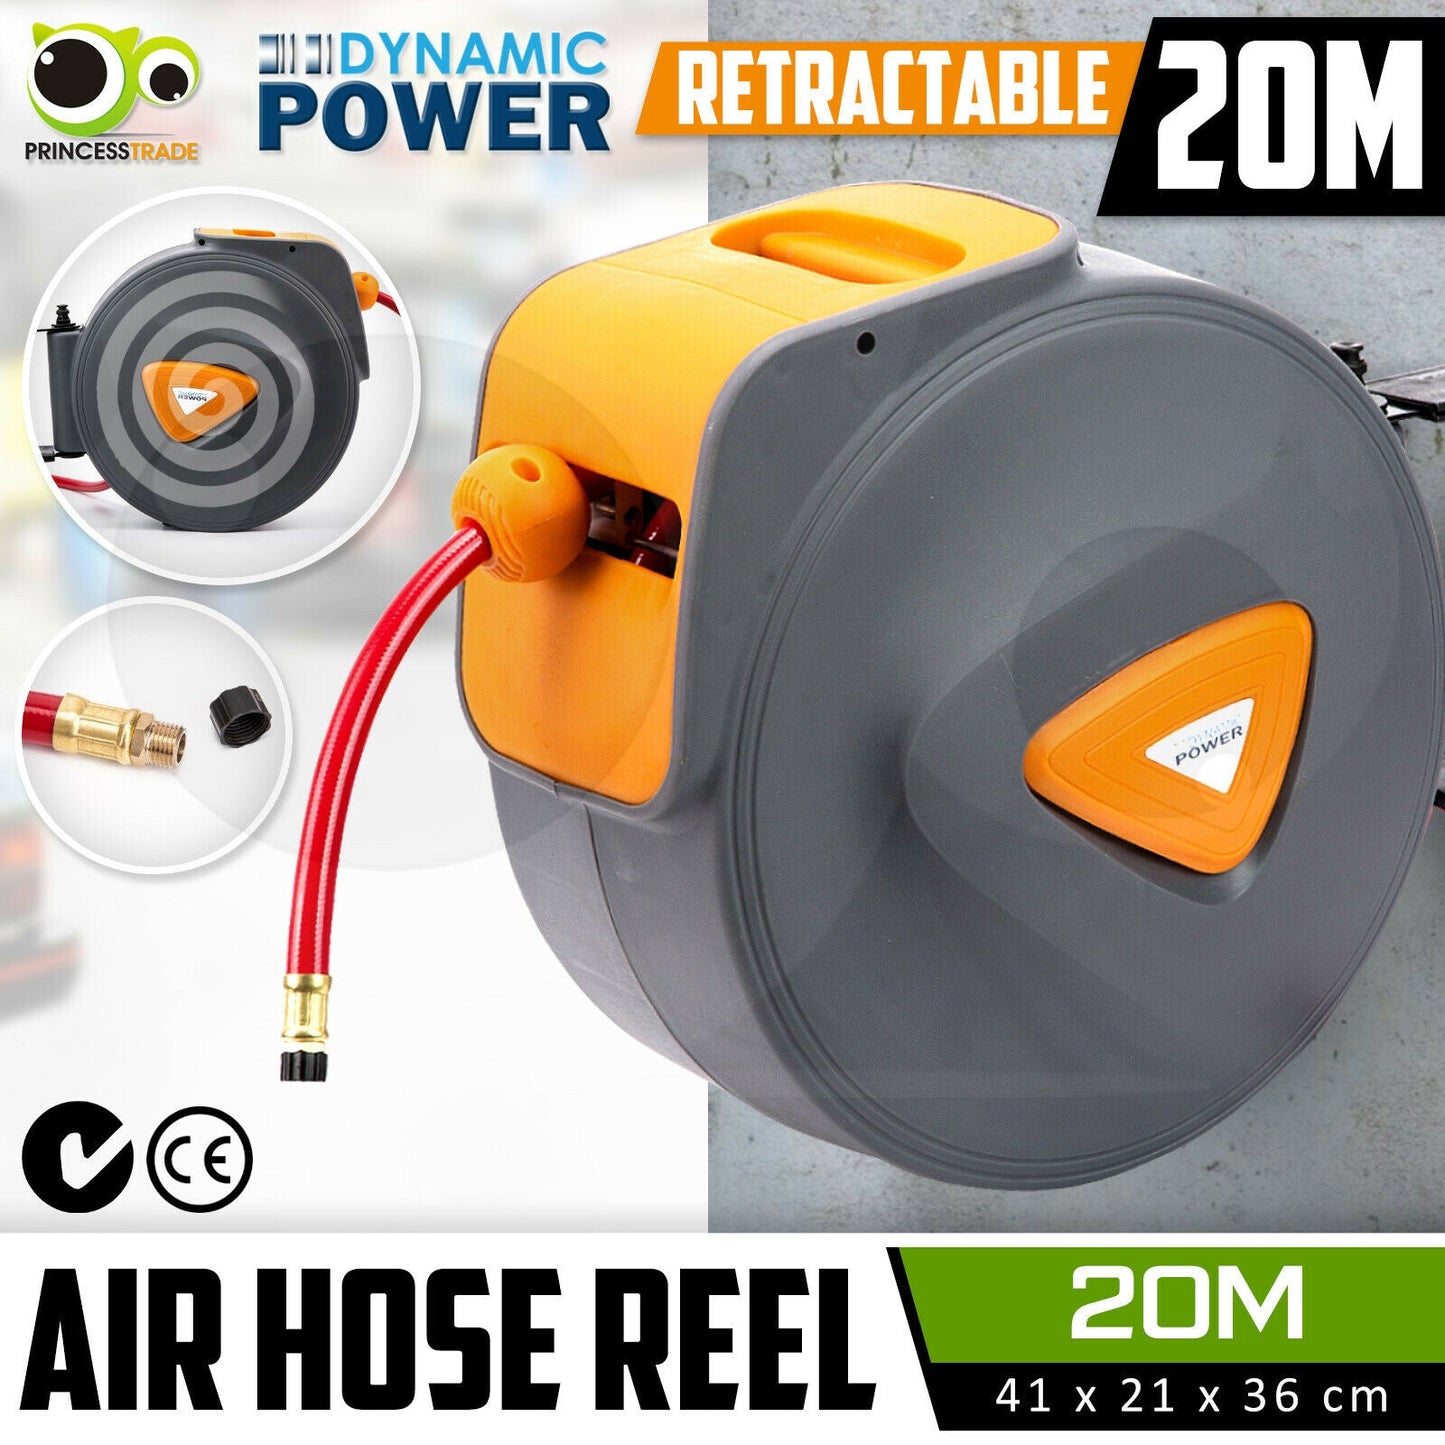 20M Retractable Air Hose Reel Commercial Auto Rewind Wall Mounted Storage Garage